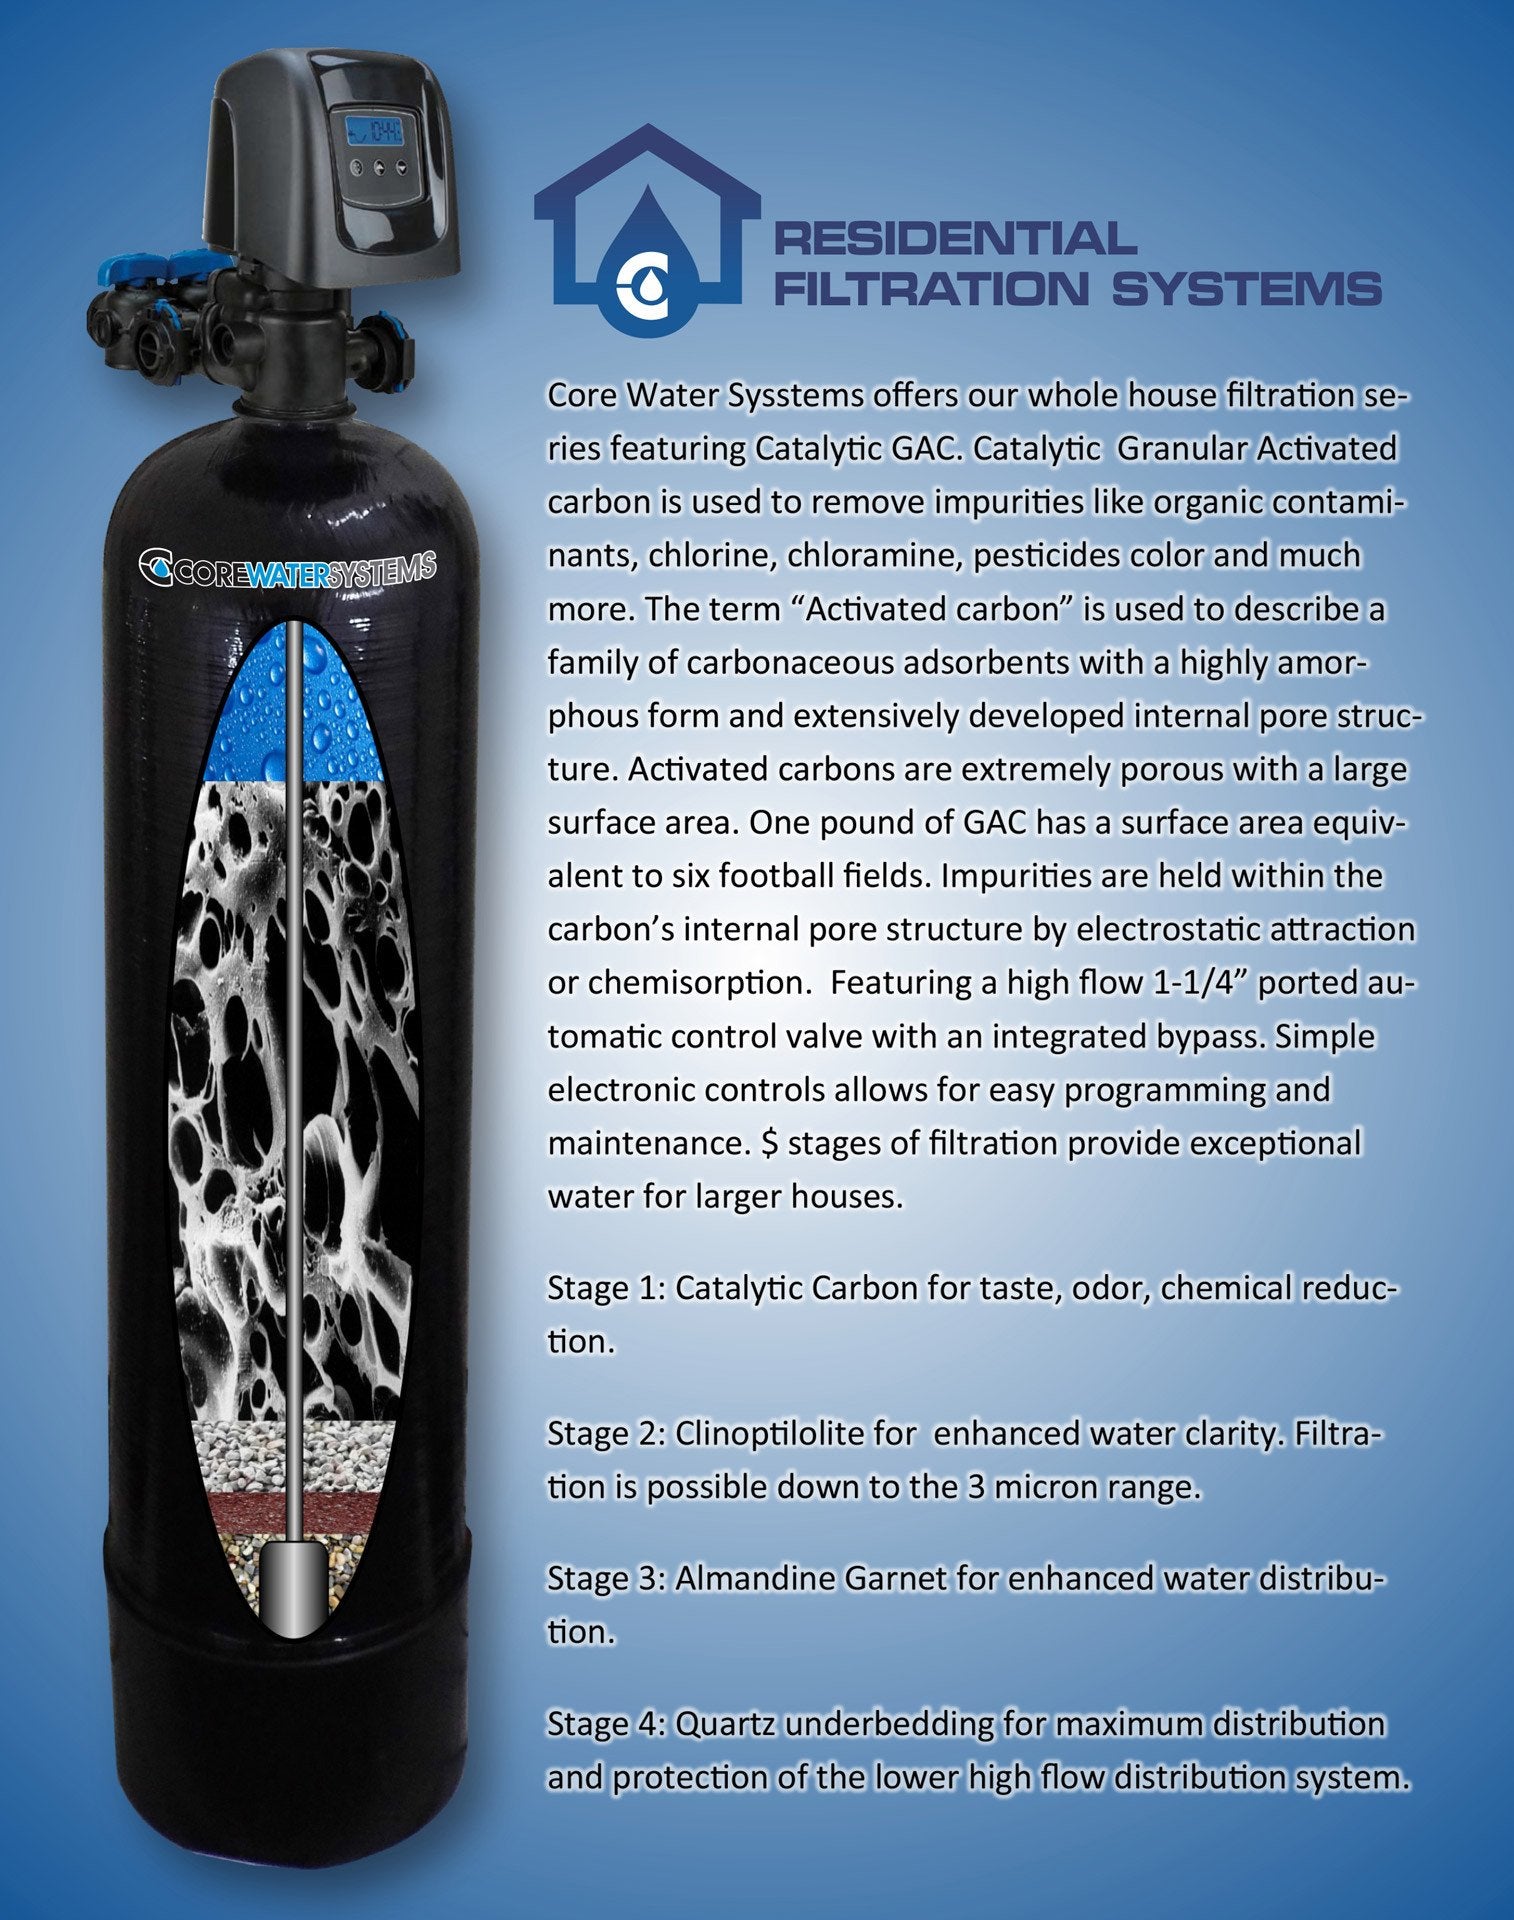 Whole-House Water Filtration Systems - Core Water Systems, Inc.